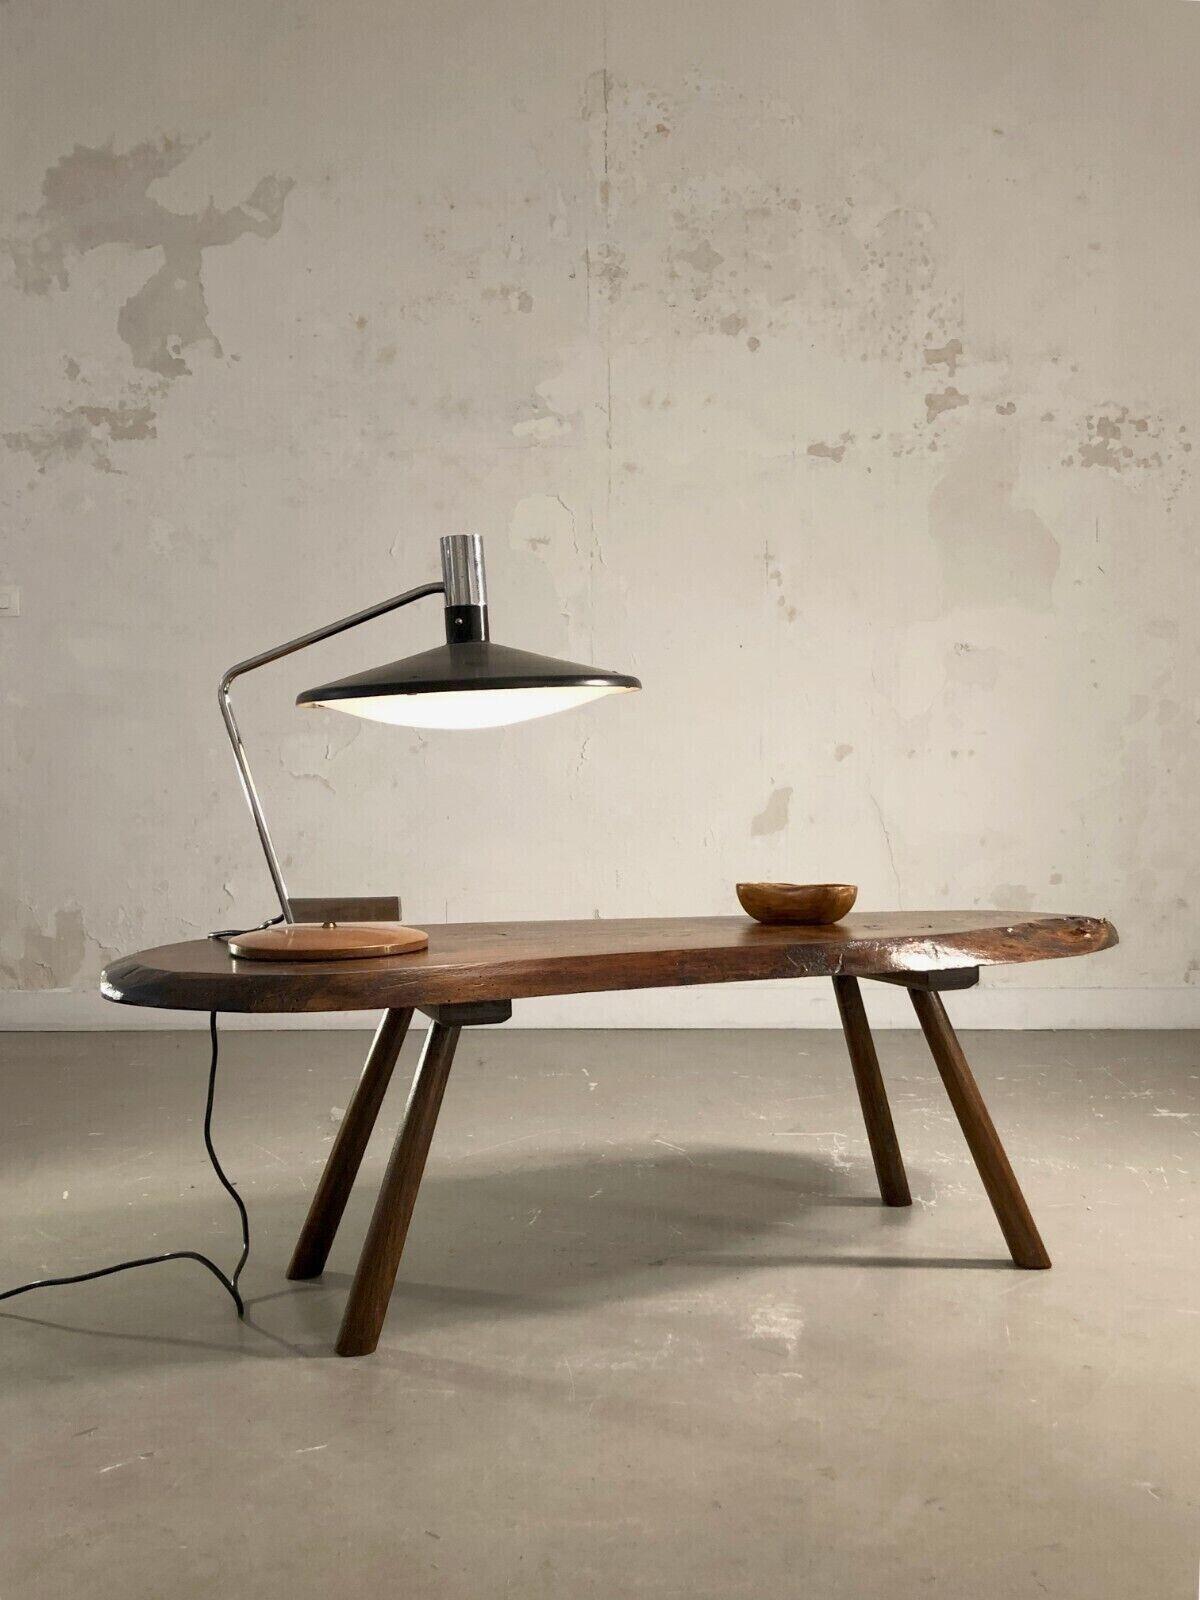 An orientable table lamp, Modernist, Bauhaus, Constructivist, Forme-Libre, with a circular weighted base in dark caramel wood, with an orientable arm in tubular chrome-plated metal and a circular orientable lampshade in black lacquered metal and its